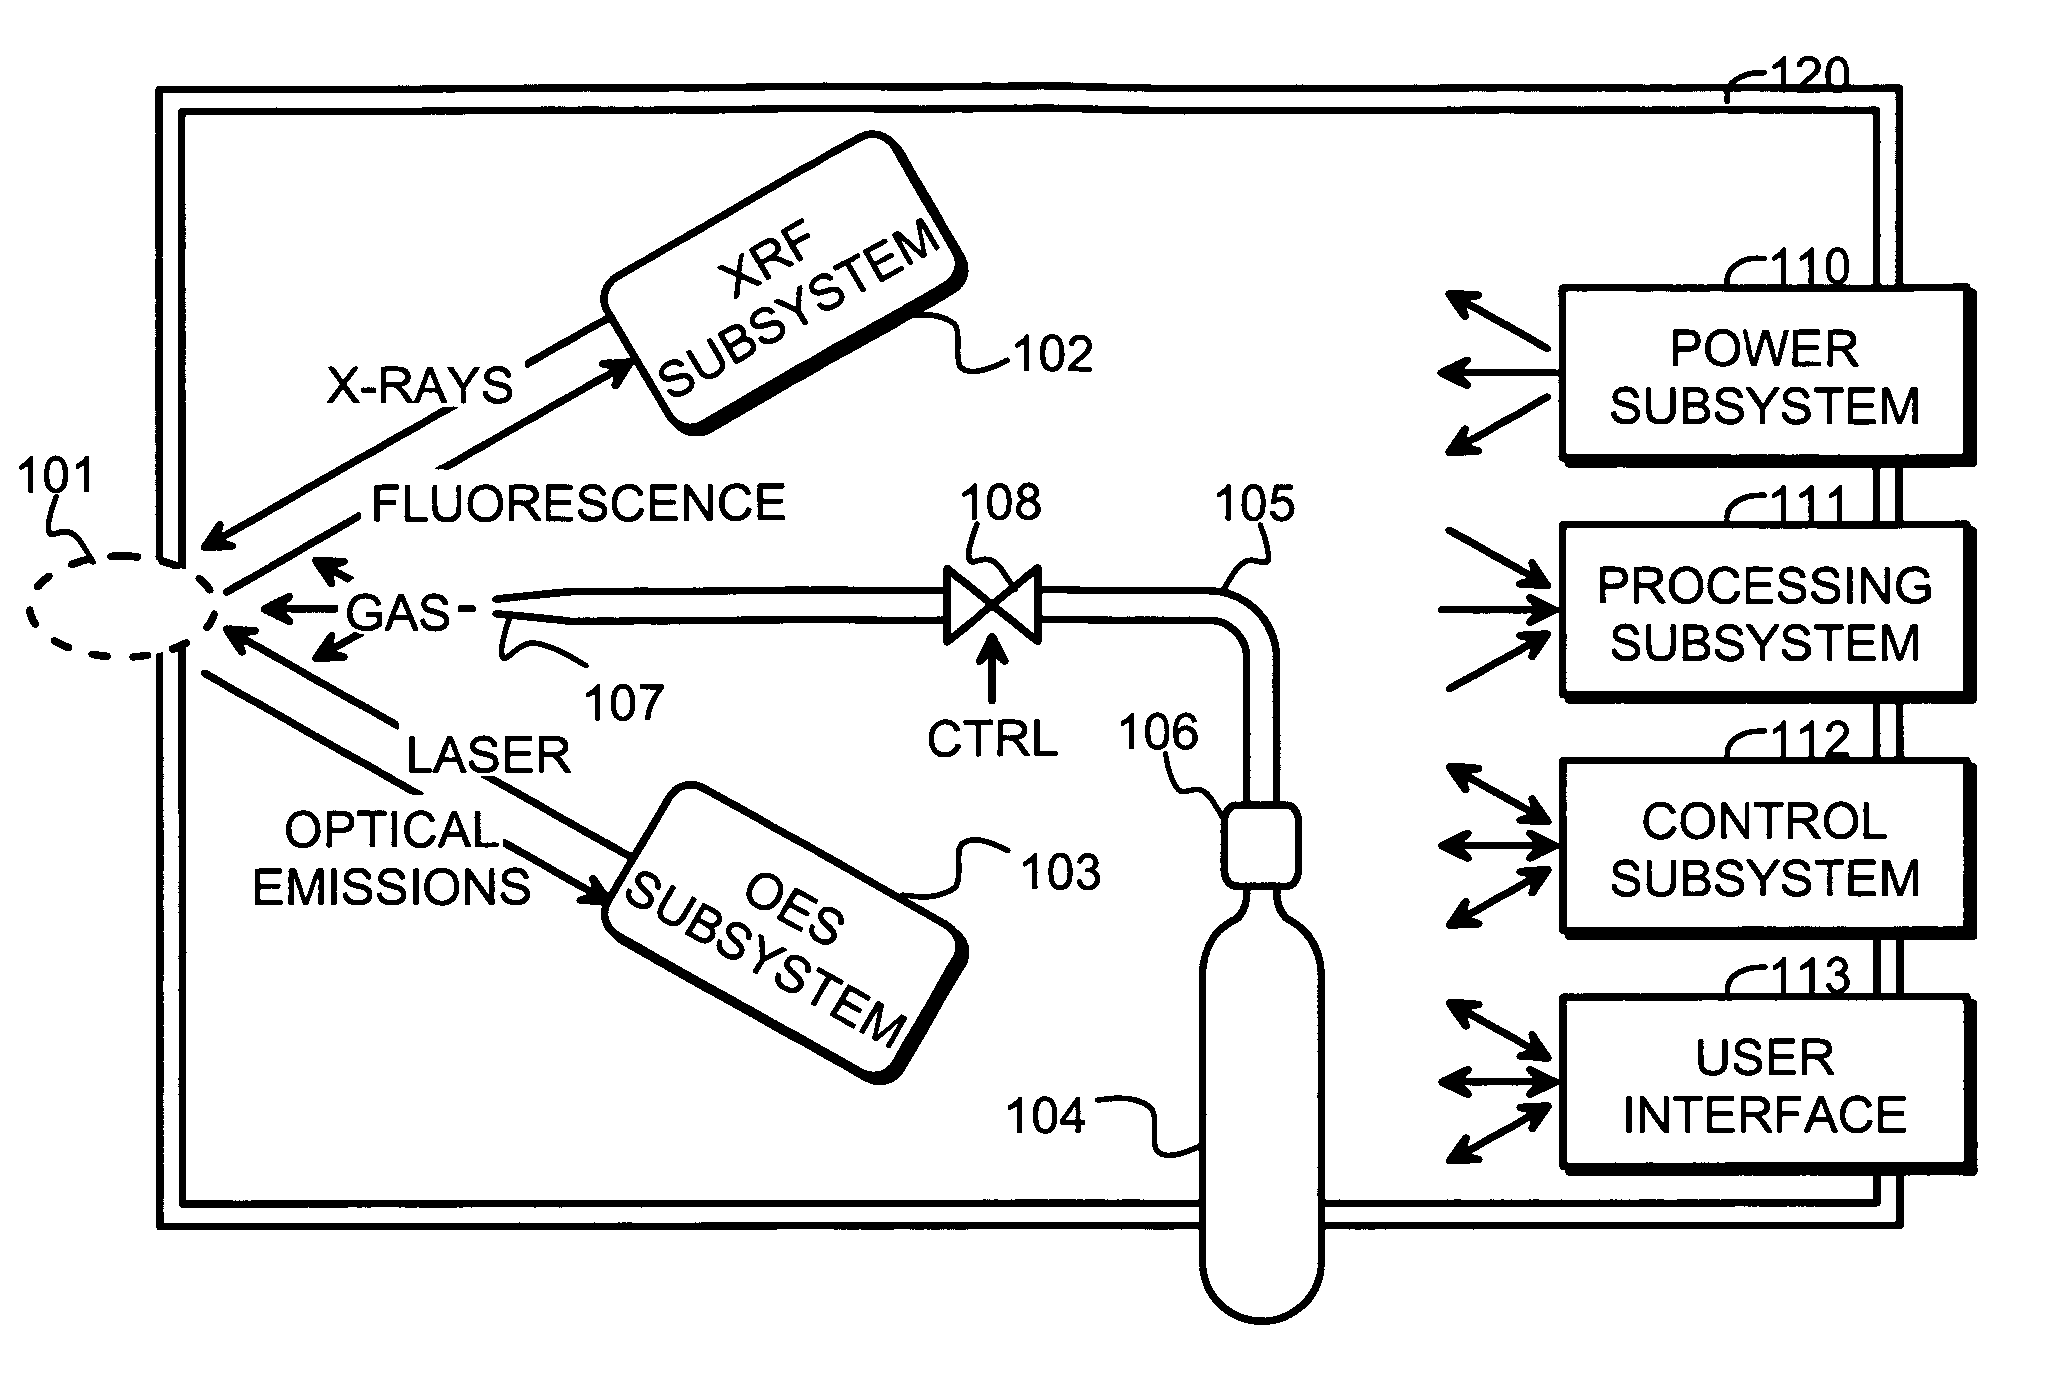 Measurement apparatus and method for determining the material composition of a sample by combined X-ray fluorescence analysis and laser-induced breakdown spectroscopy